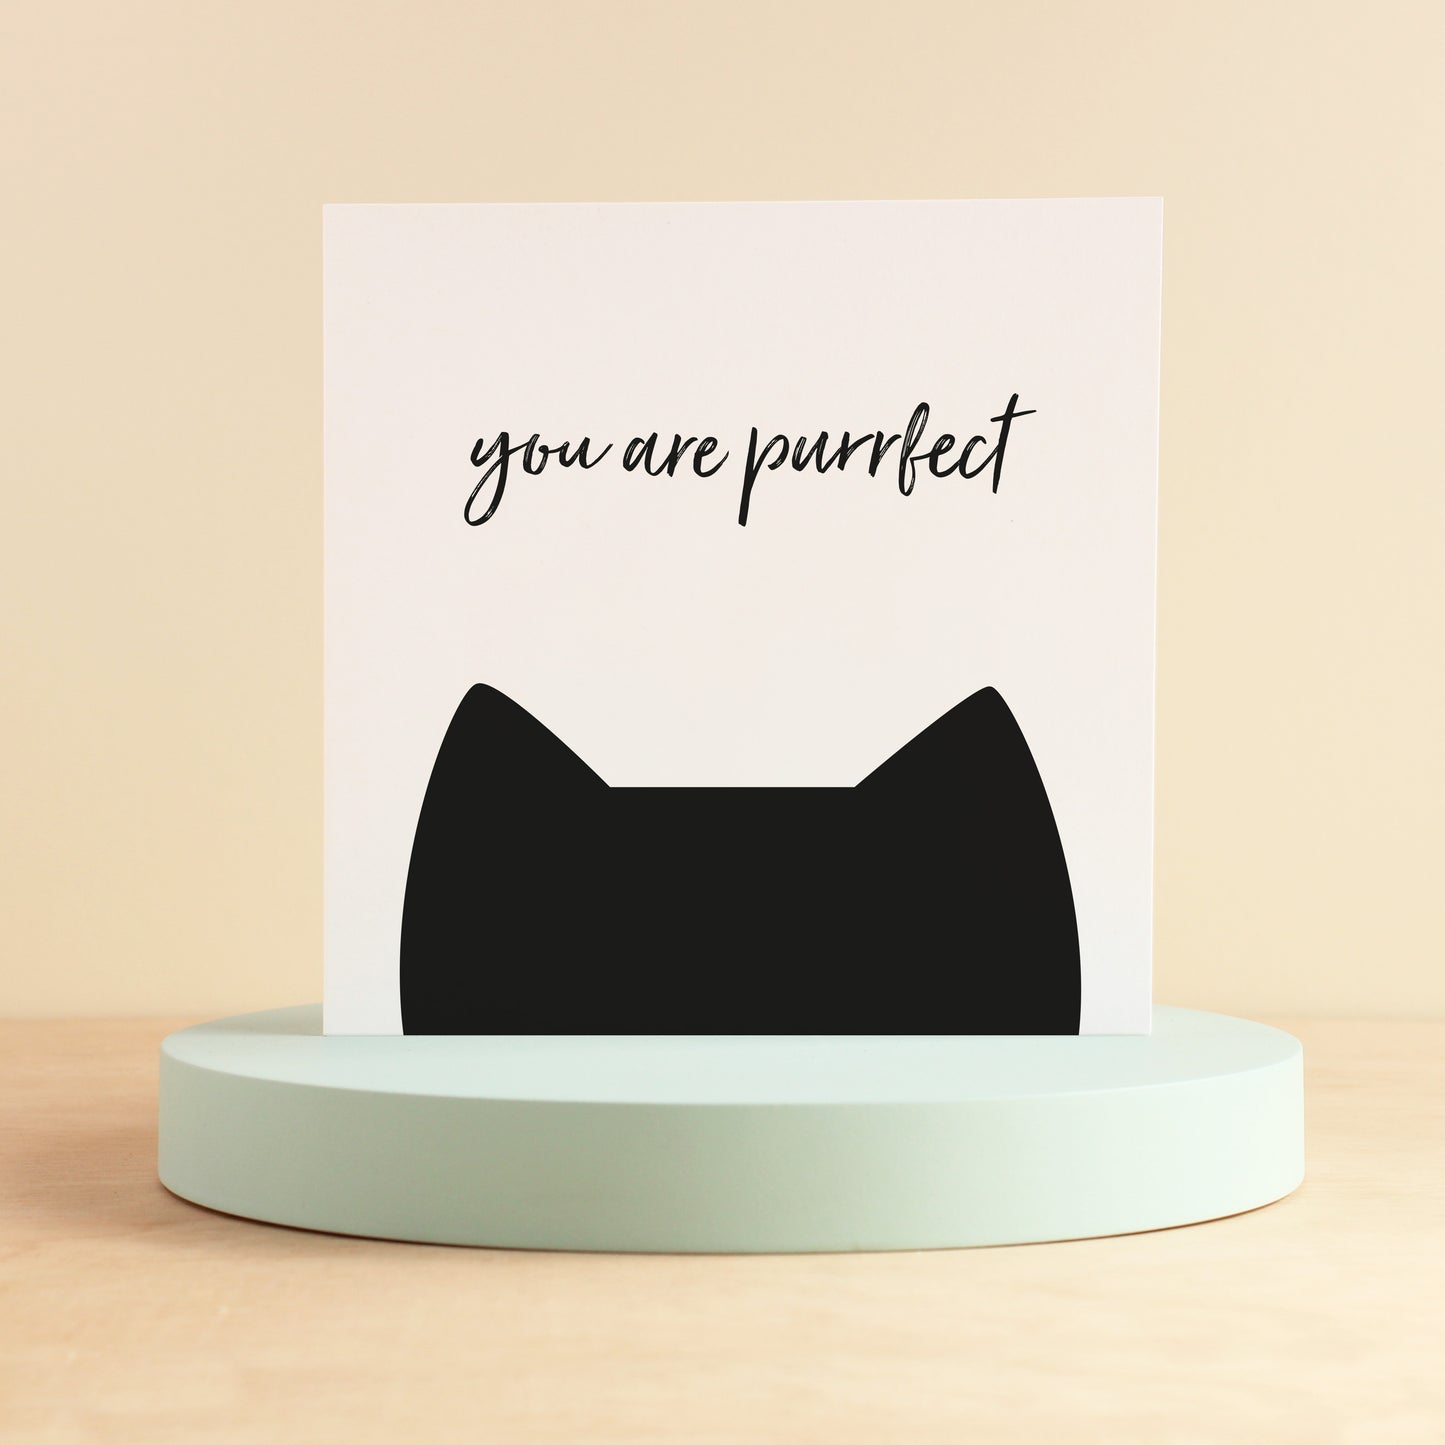 You are purrfect cat love card from Purple Tree Designs